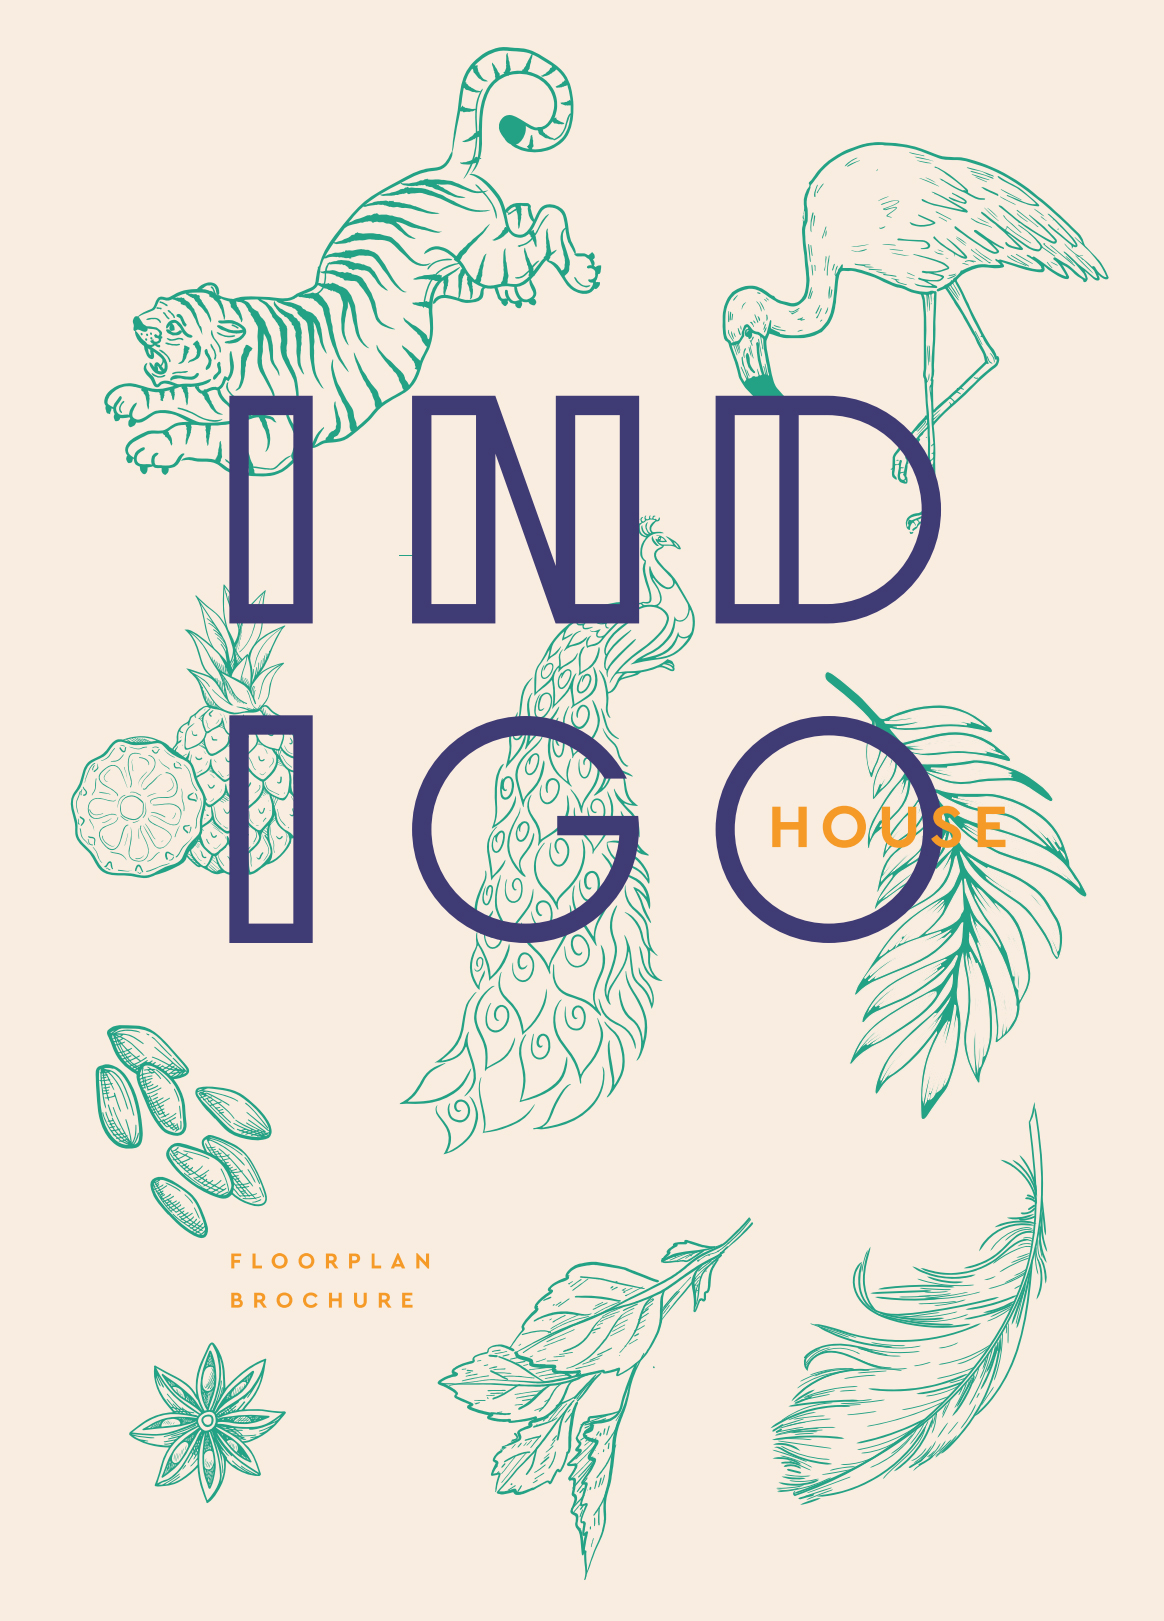 Grand Launch Event at Indigo House